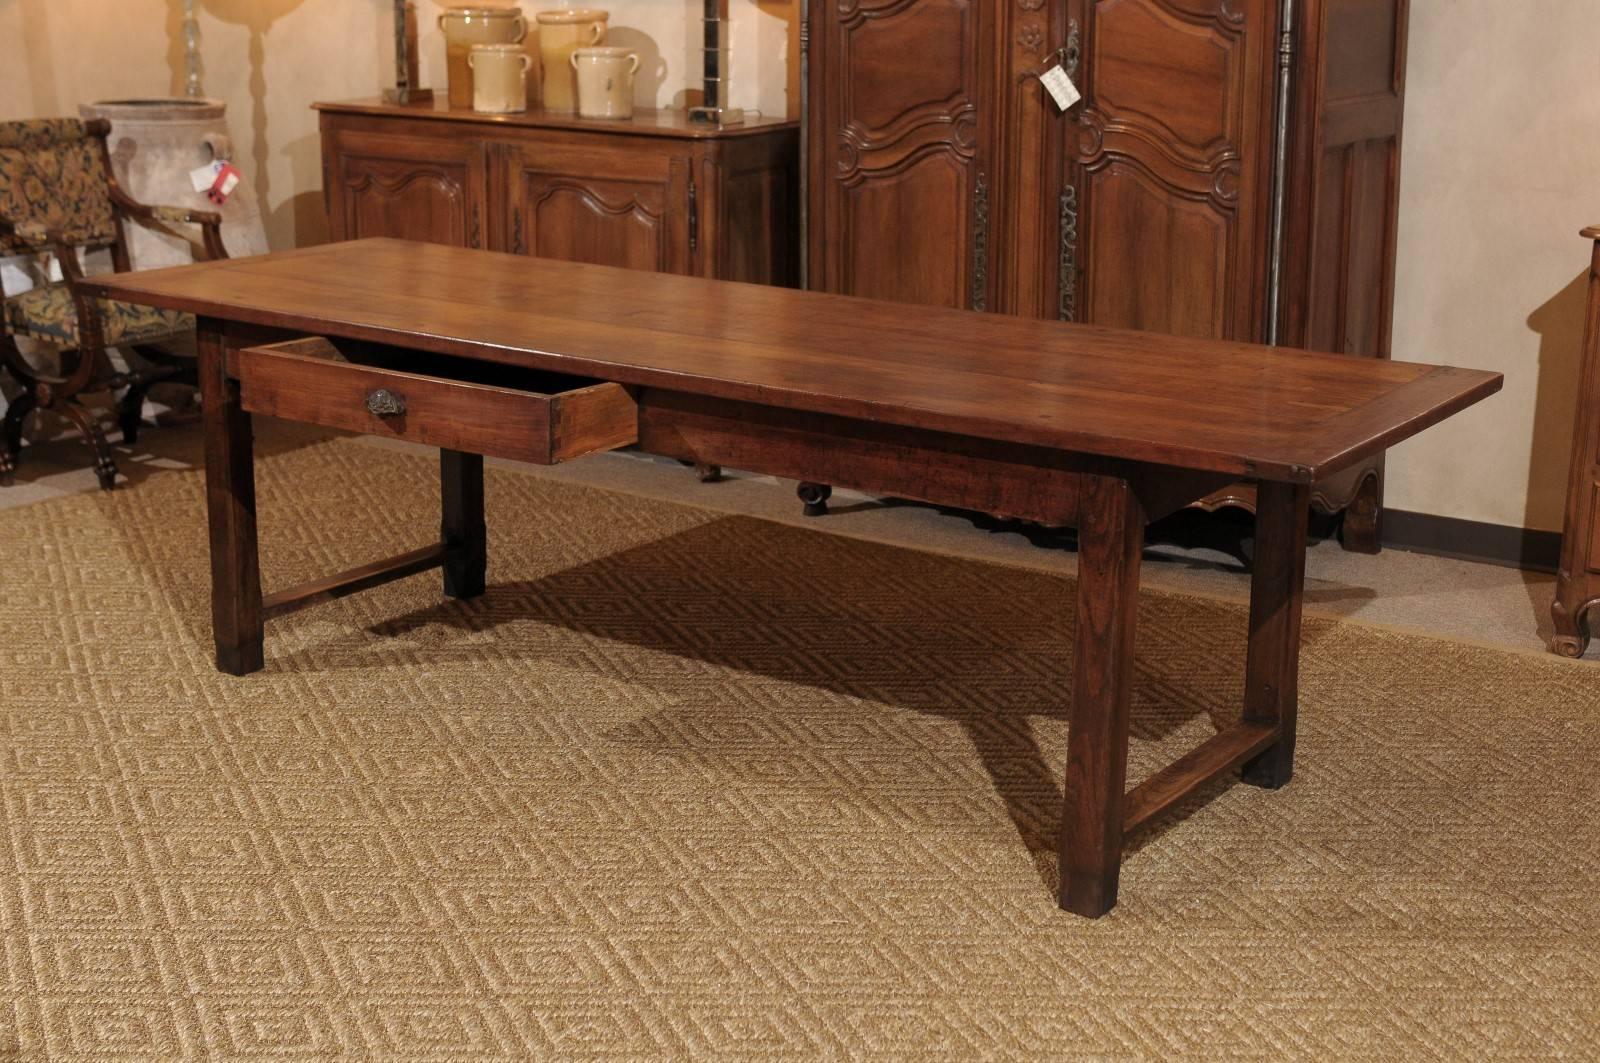 Mid-Century French Cherry Farm Table, circa 1945
This is a beautiful cherry farm table. It has a planked top and one drawer.  The length at 103 inches is very appealing for large dinner parties and family gatherings. The stretcher between the legs